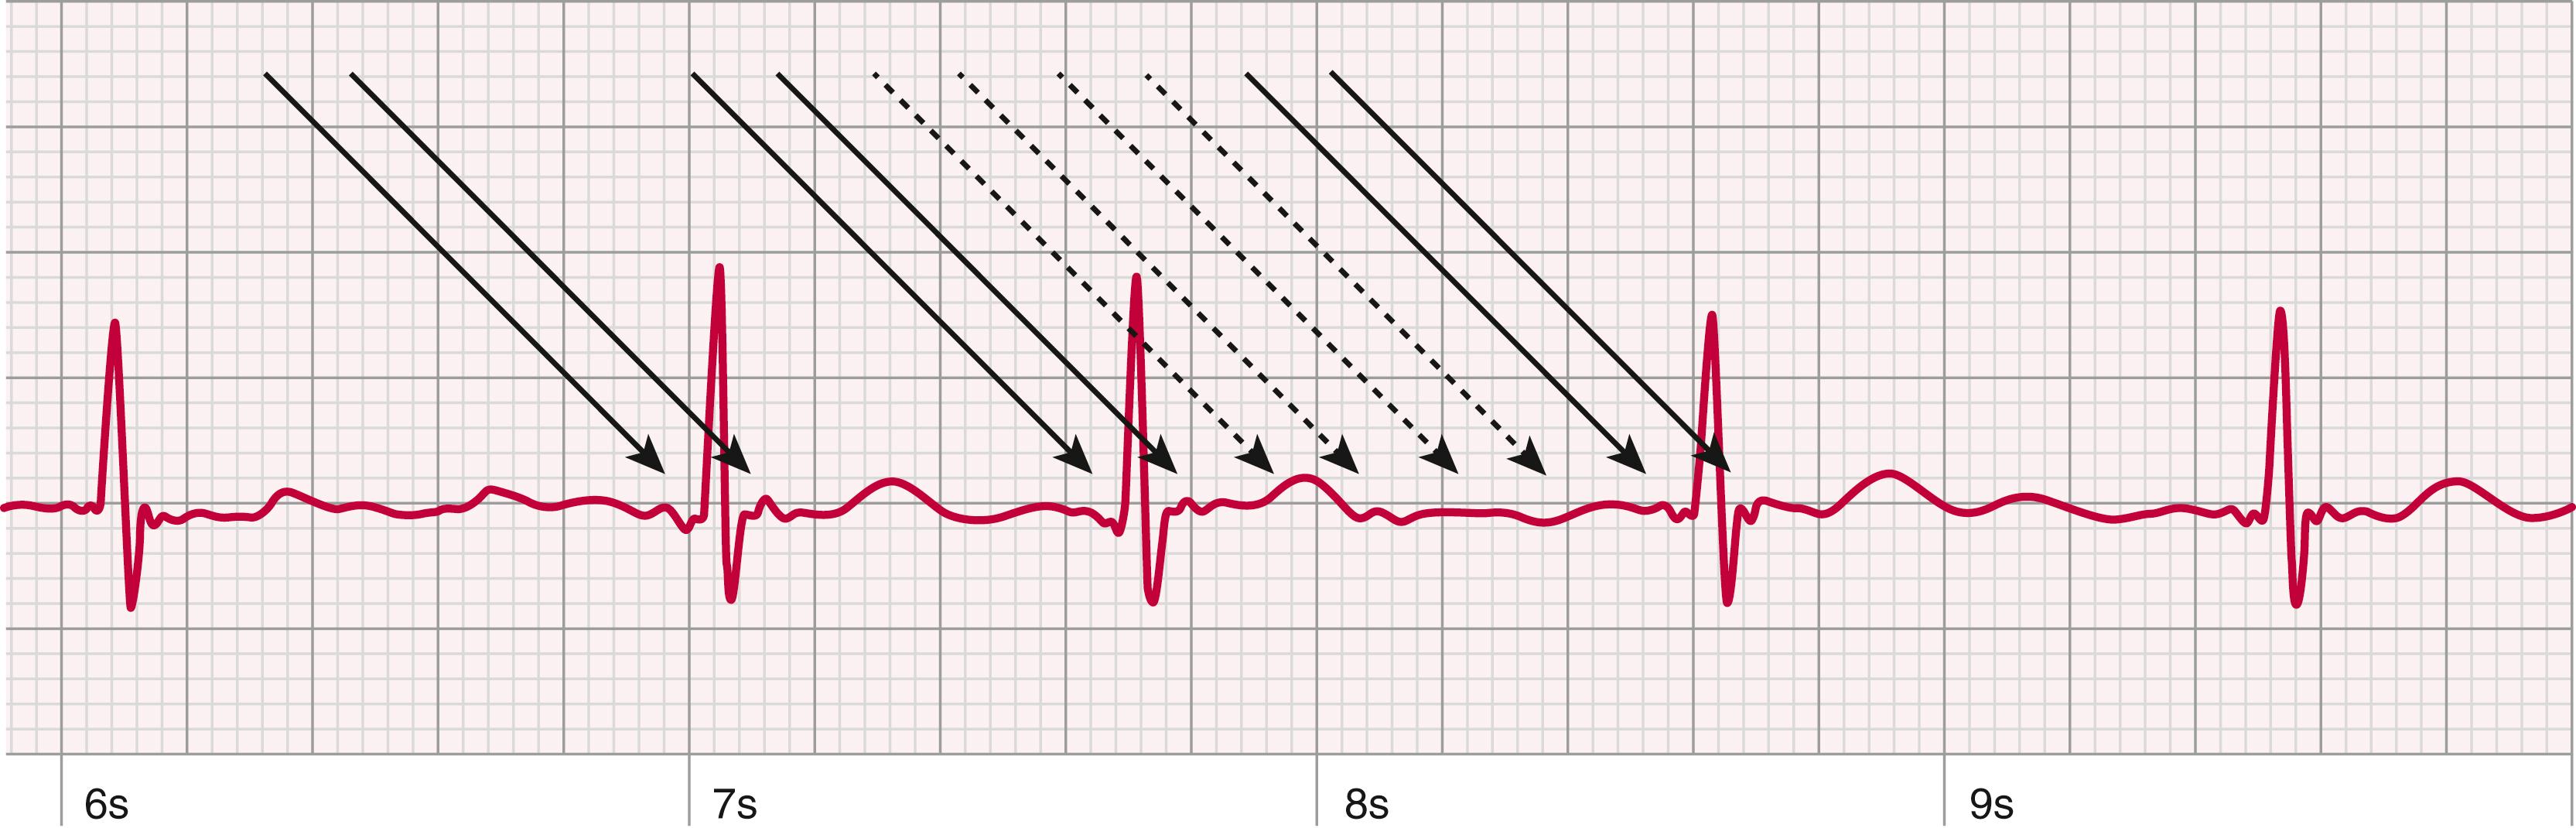 FIGURE 12.4, Atrial tachycardia misdiagnosed as atrial fibrillation due to filter attenuation. Careful observation of this Apple Watch electrocardiogram (ECG) rhythm strip identifies discrete organized atrial activity denoted by the solid arrows. The dashed arrows indicate atrial activity that appears attenuated due to filtering. A 12-lead ECG identified a macro-reentrant stable atrial tachycardia. Watch sampling was 513 Hz with 10 mm/mV gain and 25 mm/sec paper speed.